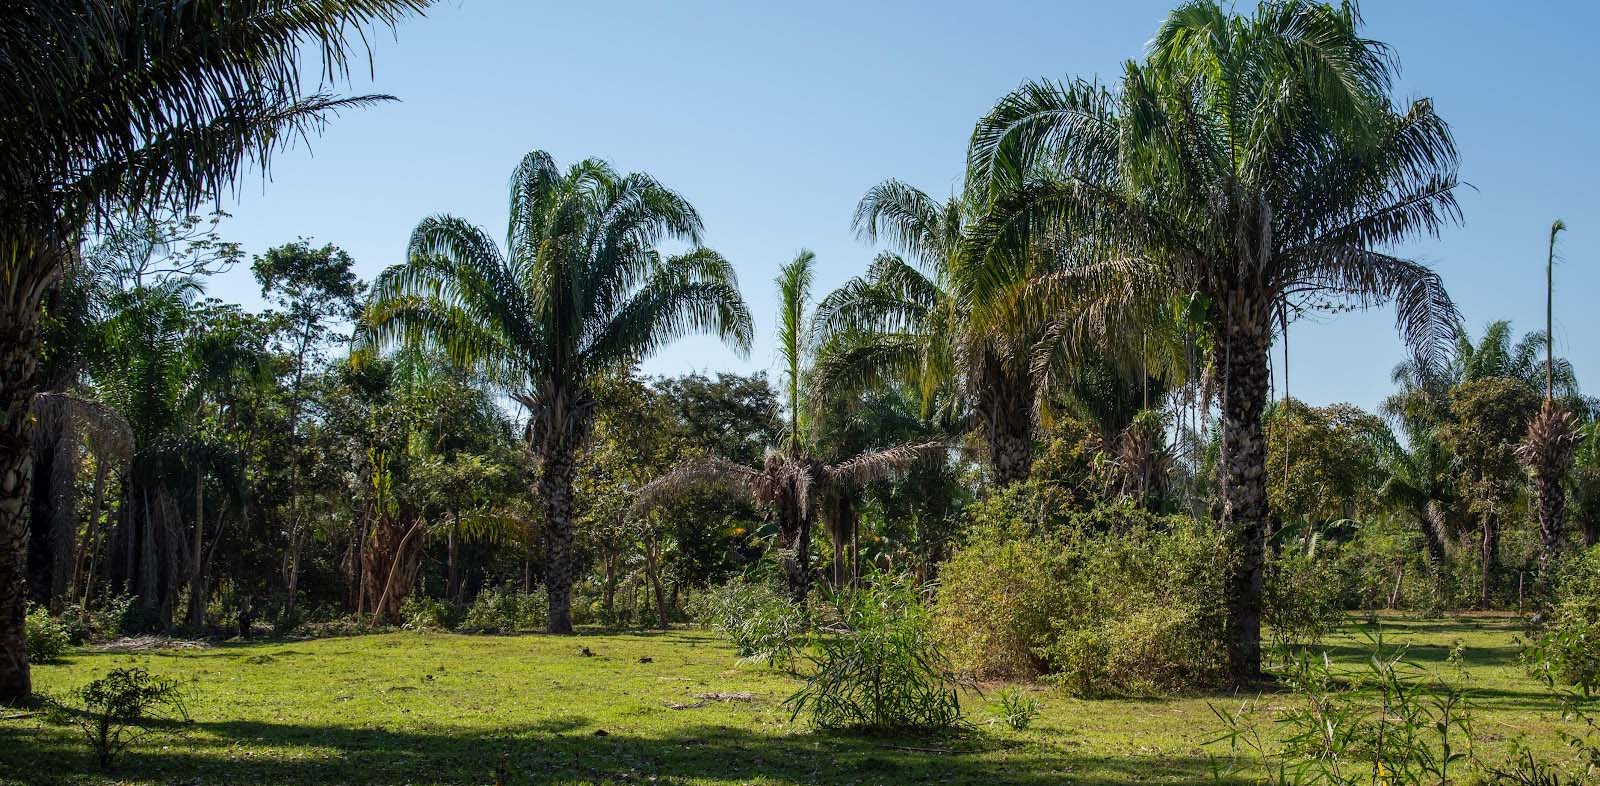 Sunny landscape featuring tall palm trees and lush greenery in a tropical forest setting.